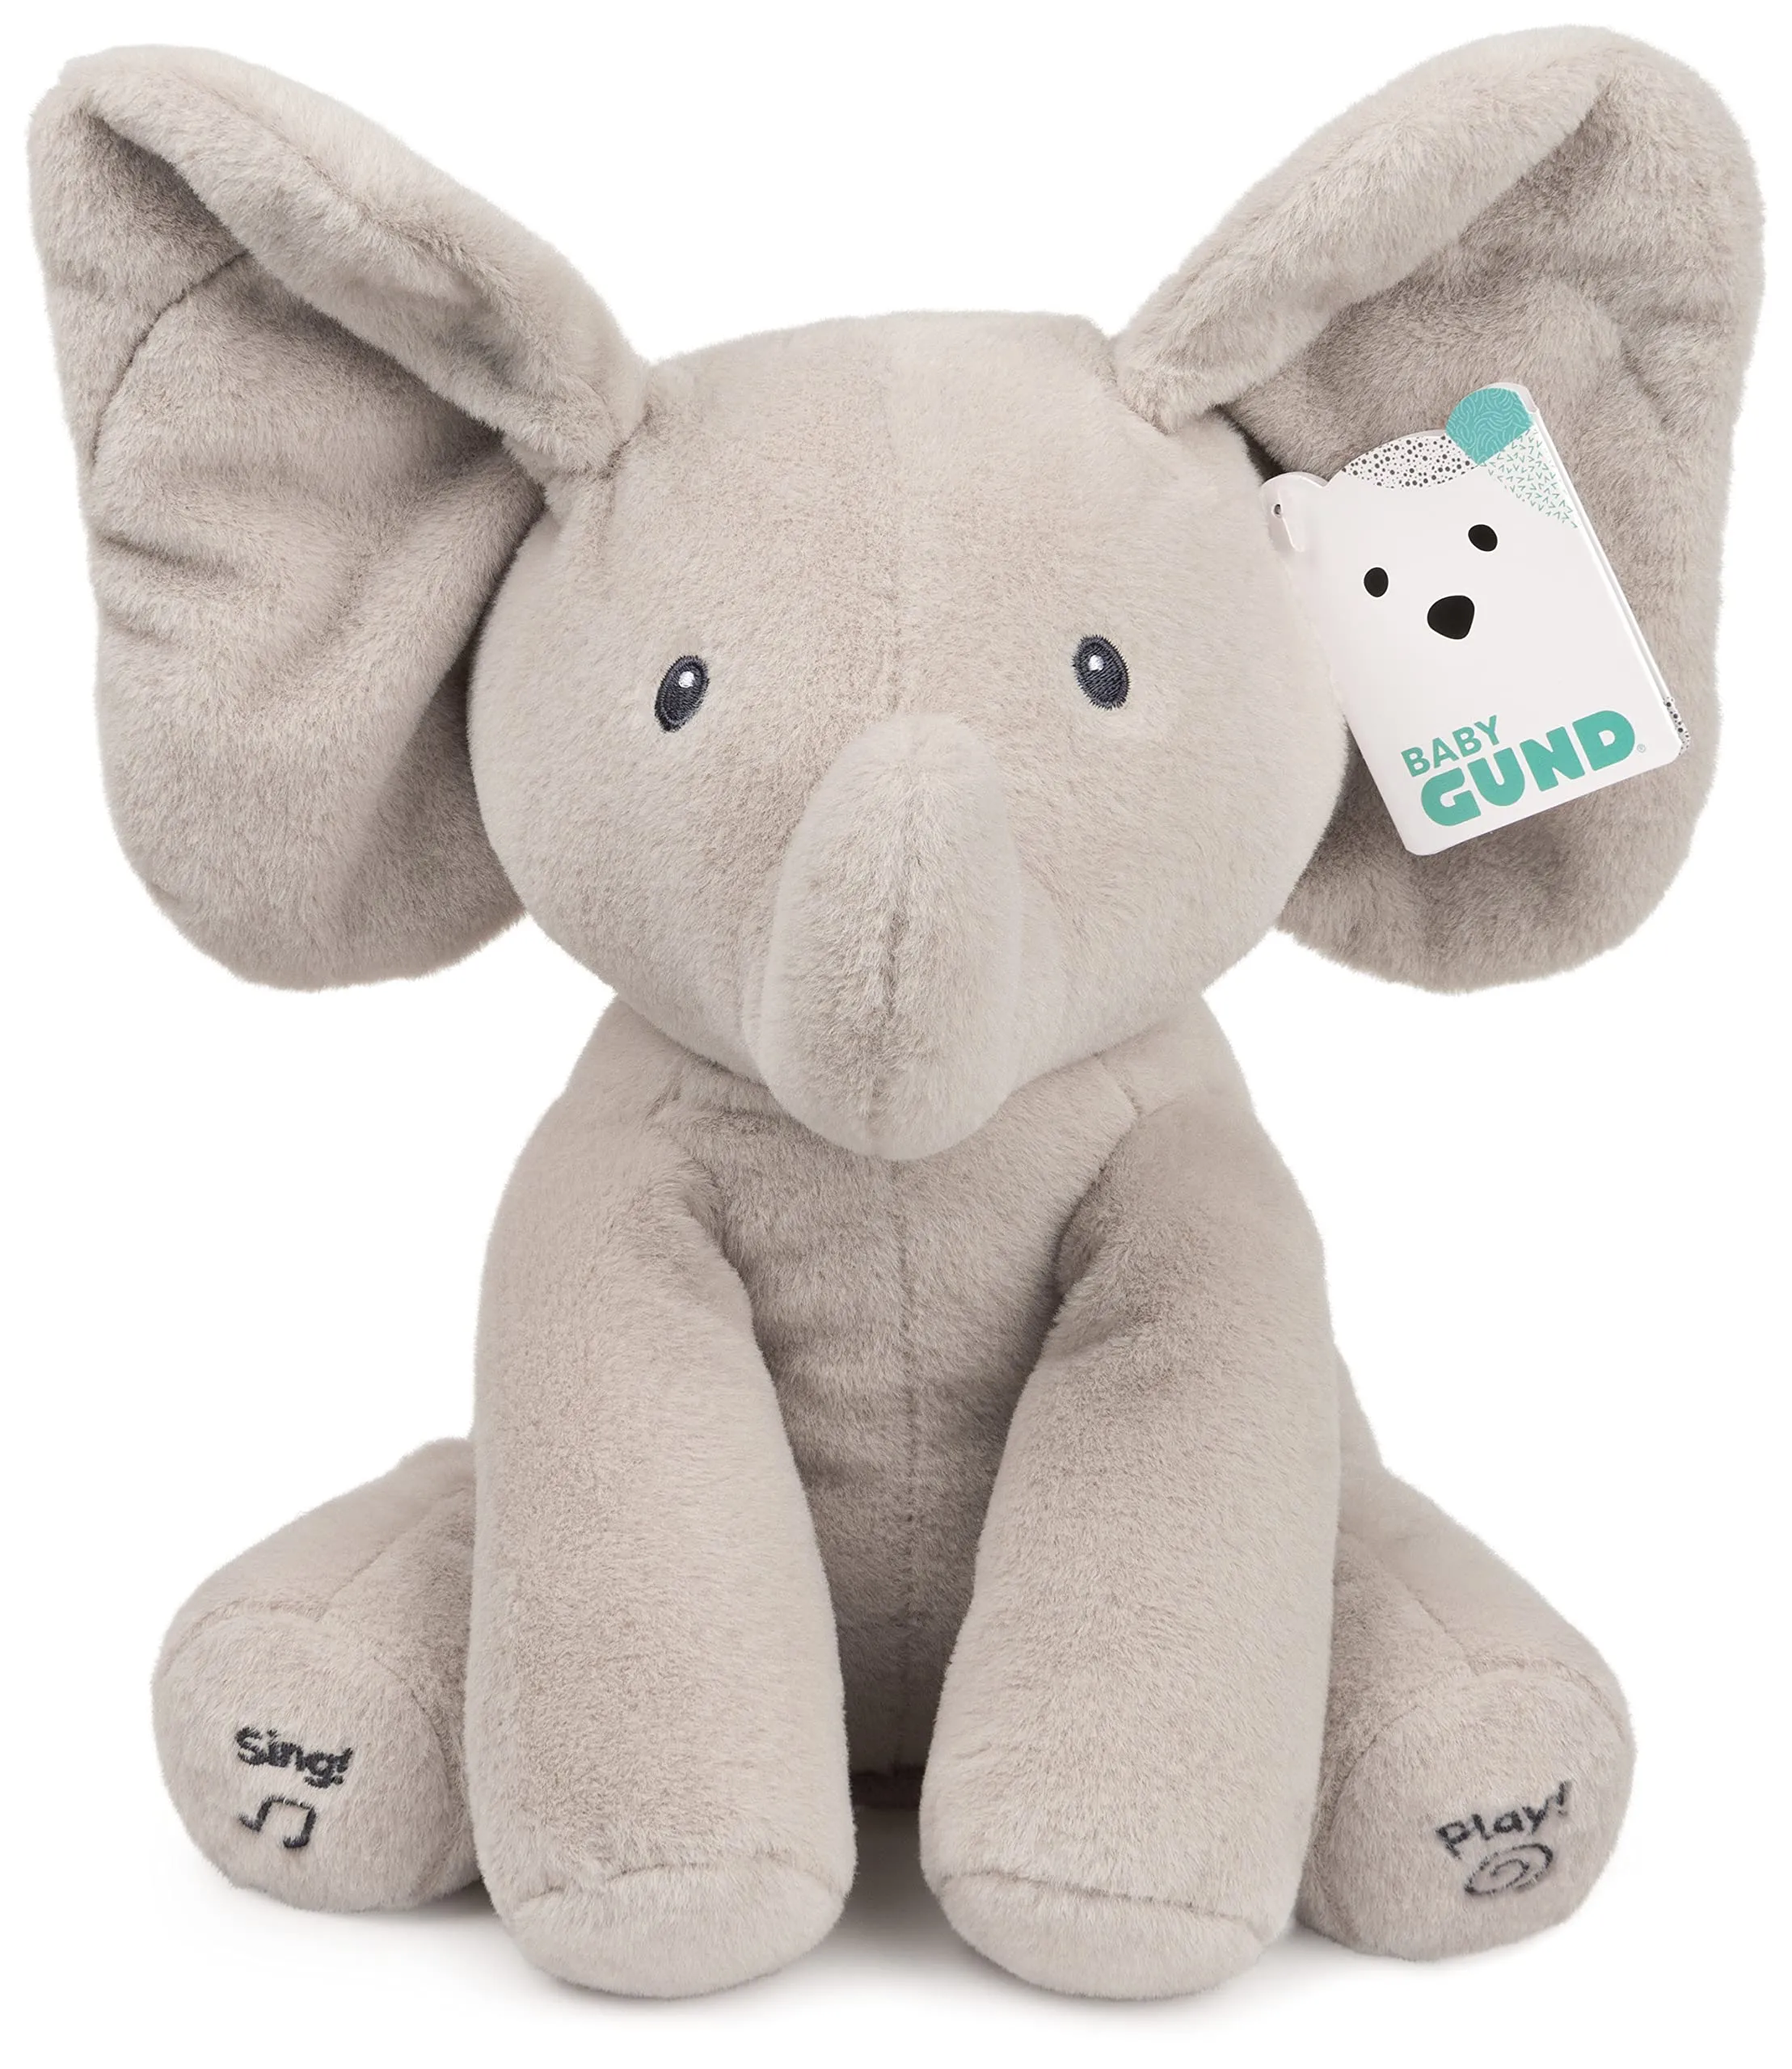 GUND Baby Official Animated Flappy The Elephant Stuffed Animal Baby Toy Plush